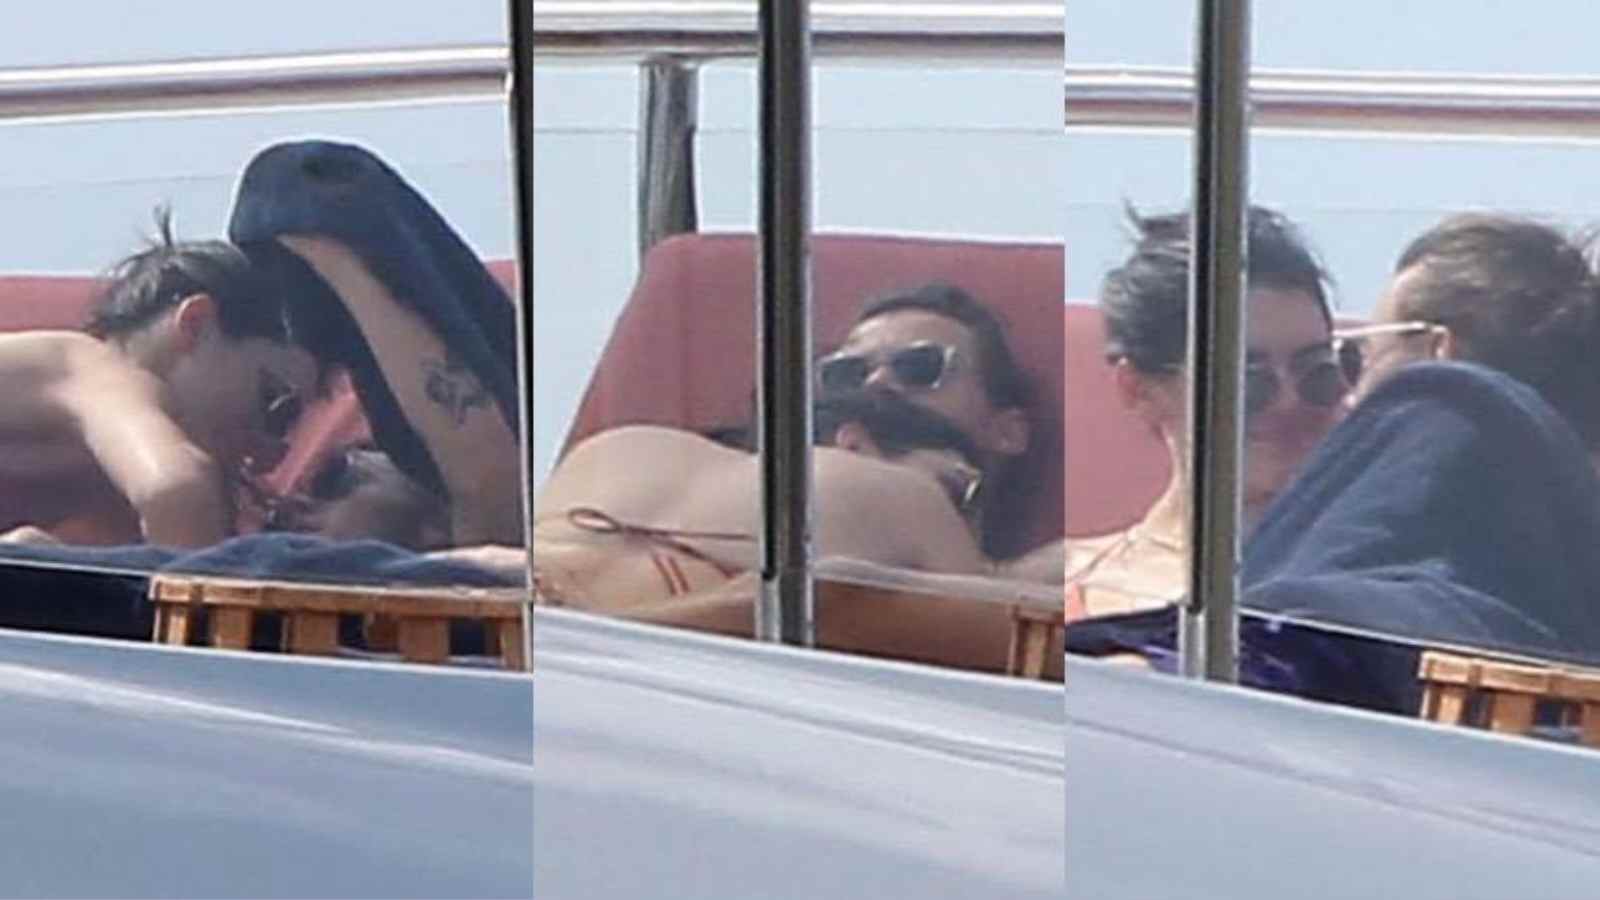 Kendall Jenner and Harry Styles cuddling in the yacht